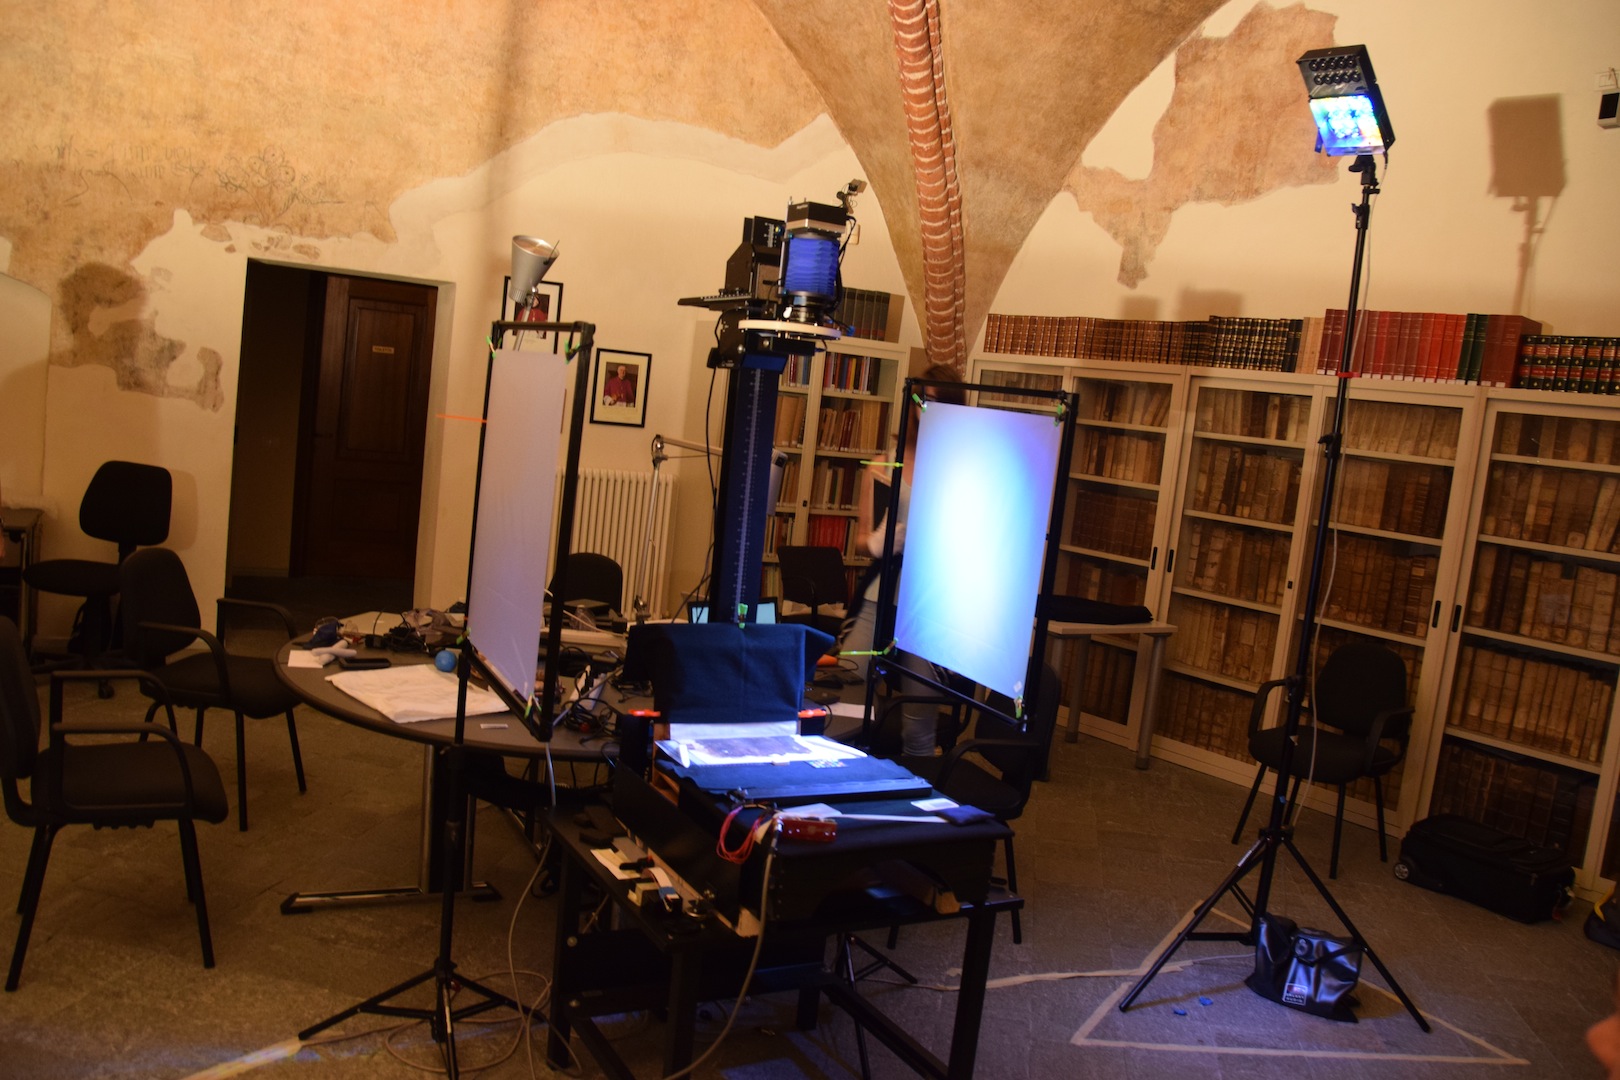 ON SITE: While imaging at the Archive and Capitulary Library in Vercelli, Italy, the team set up in an 11th-century tower.(University photos / The Lazarus Project)